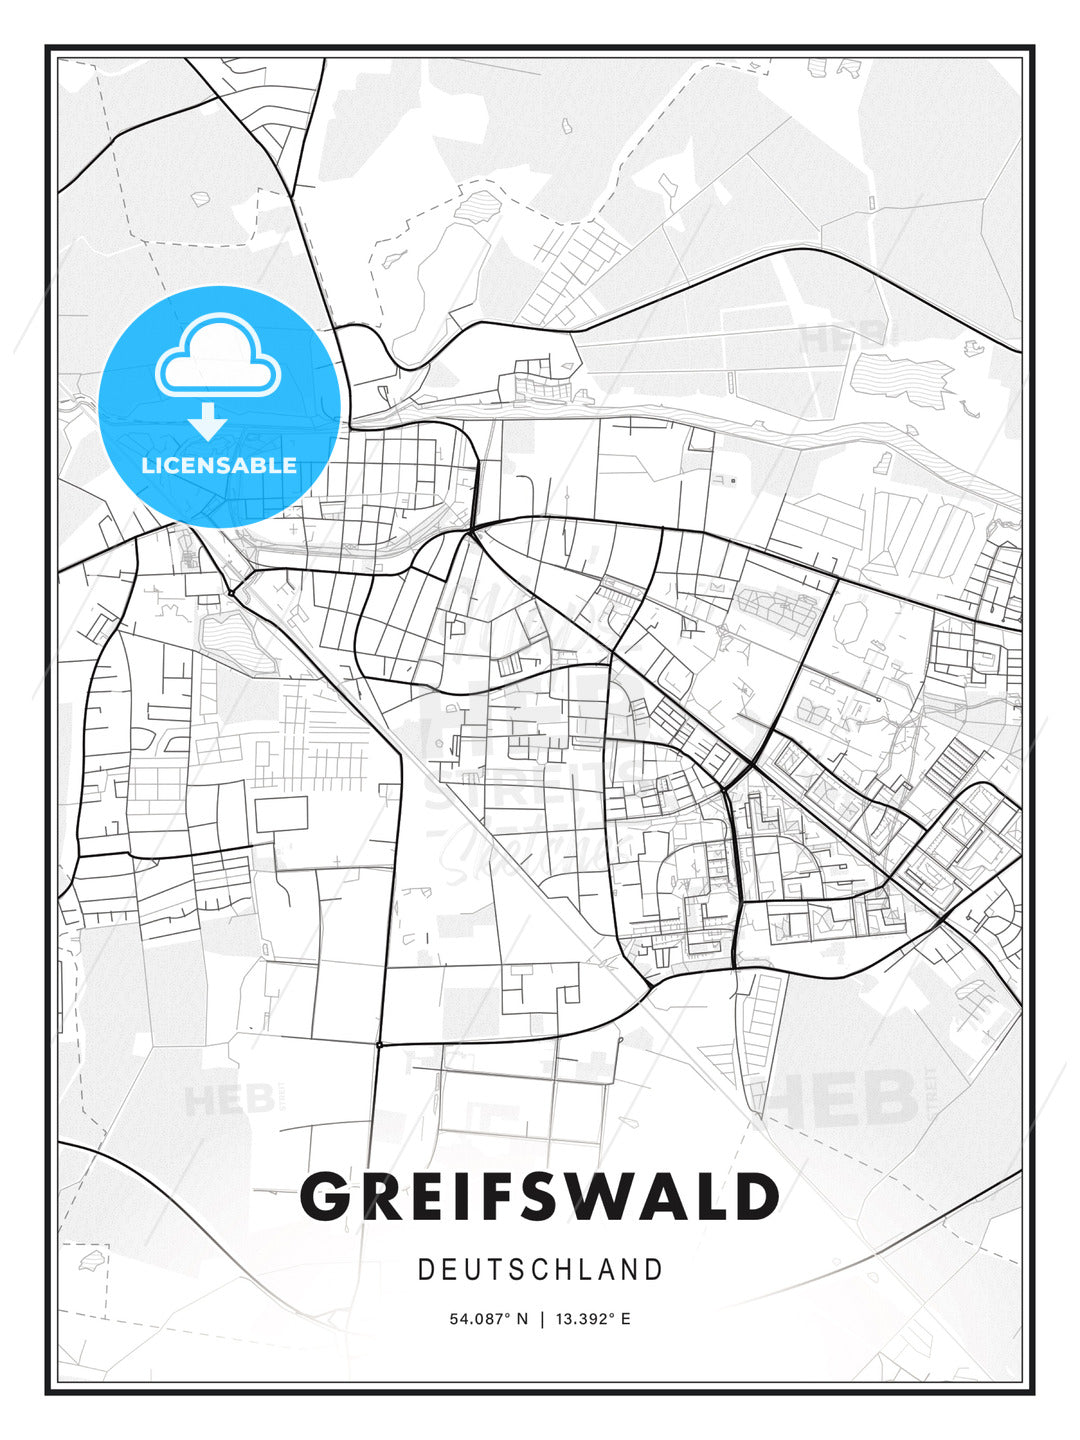 Greifswald, Germany, Modern Print Template in Various Formats - HEBSTREITS Sketches